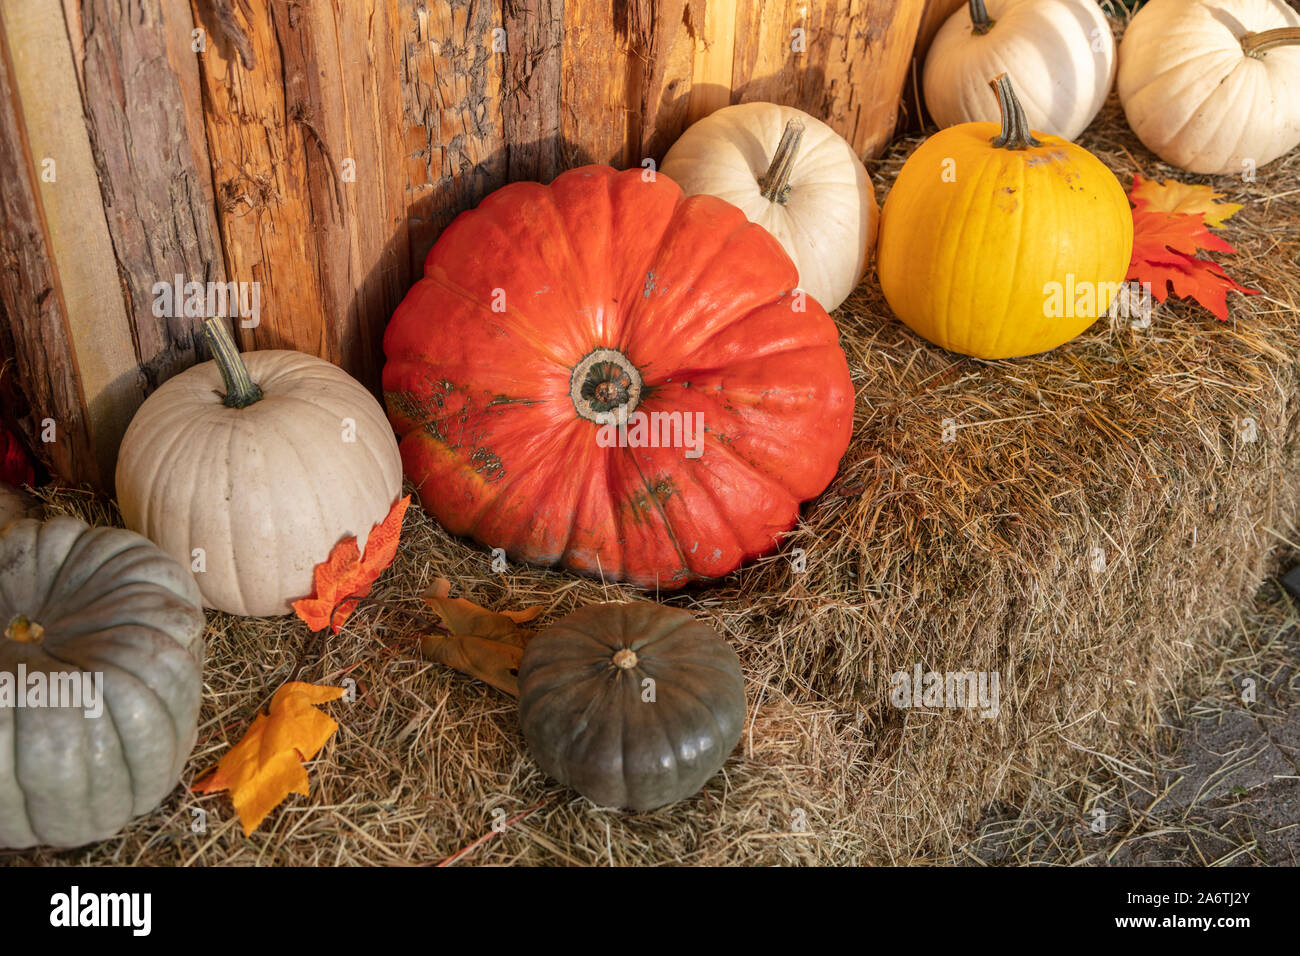 Colorful pumpkins on hay bales, close up Stock Photo